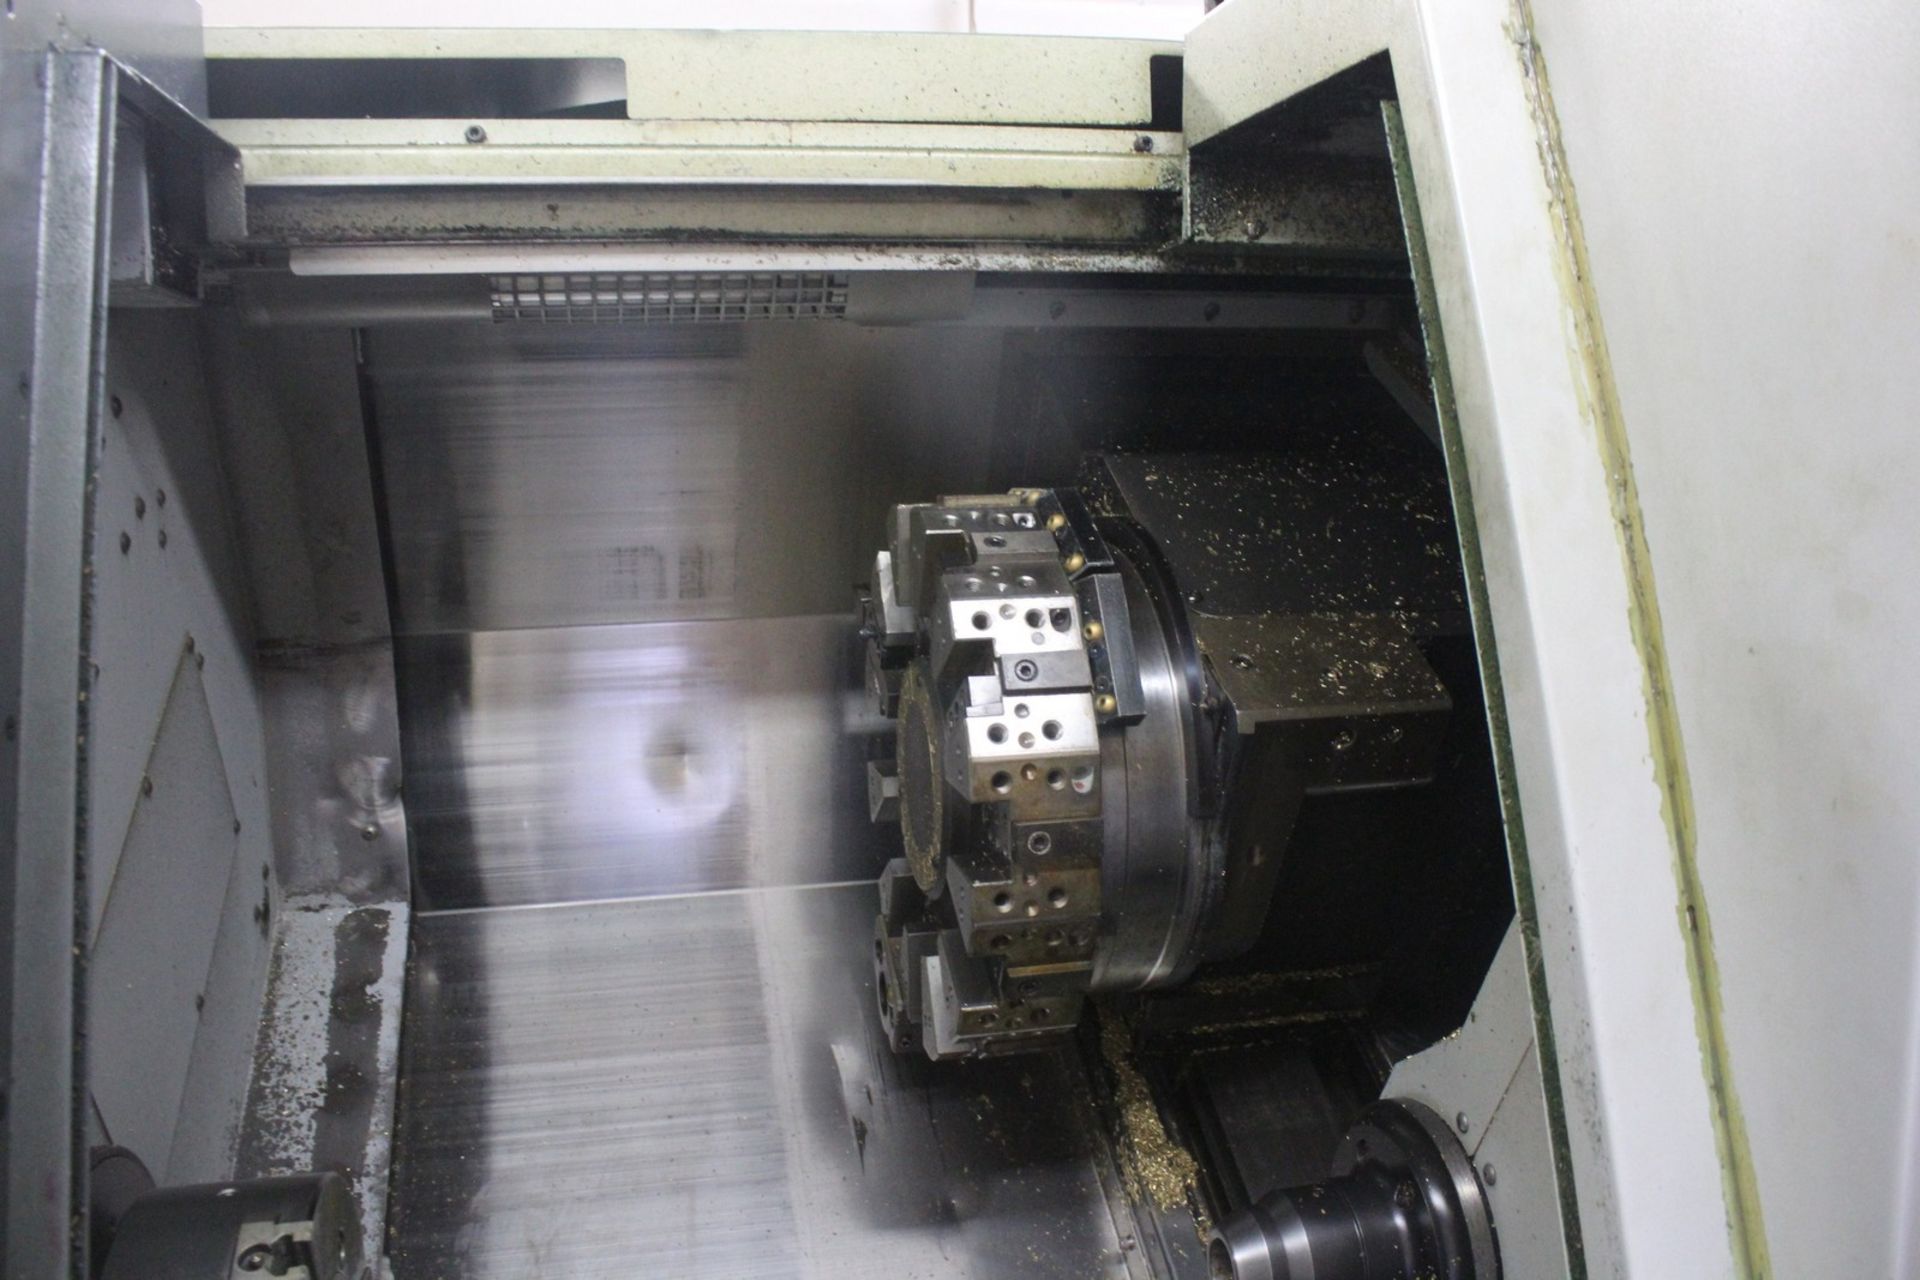 MORI SEIKI SL204S/500 CNC TURNING CENTER S/N SL200CG1783, SUB SPINDLE,9.3"X-AXIS TRAVEL,19.5" Z-AXIS - Image 2 of 6